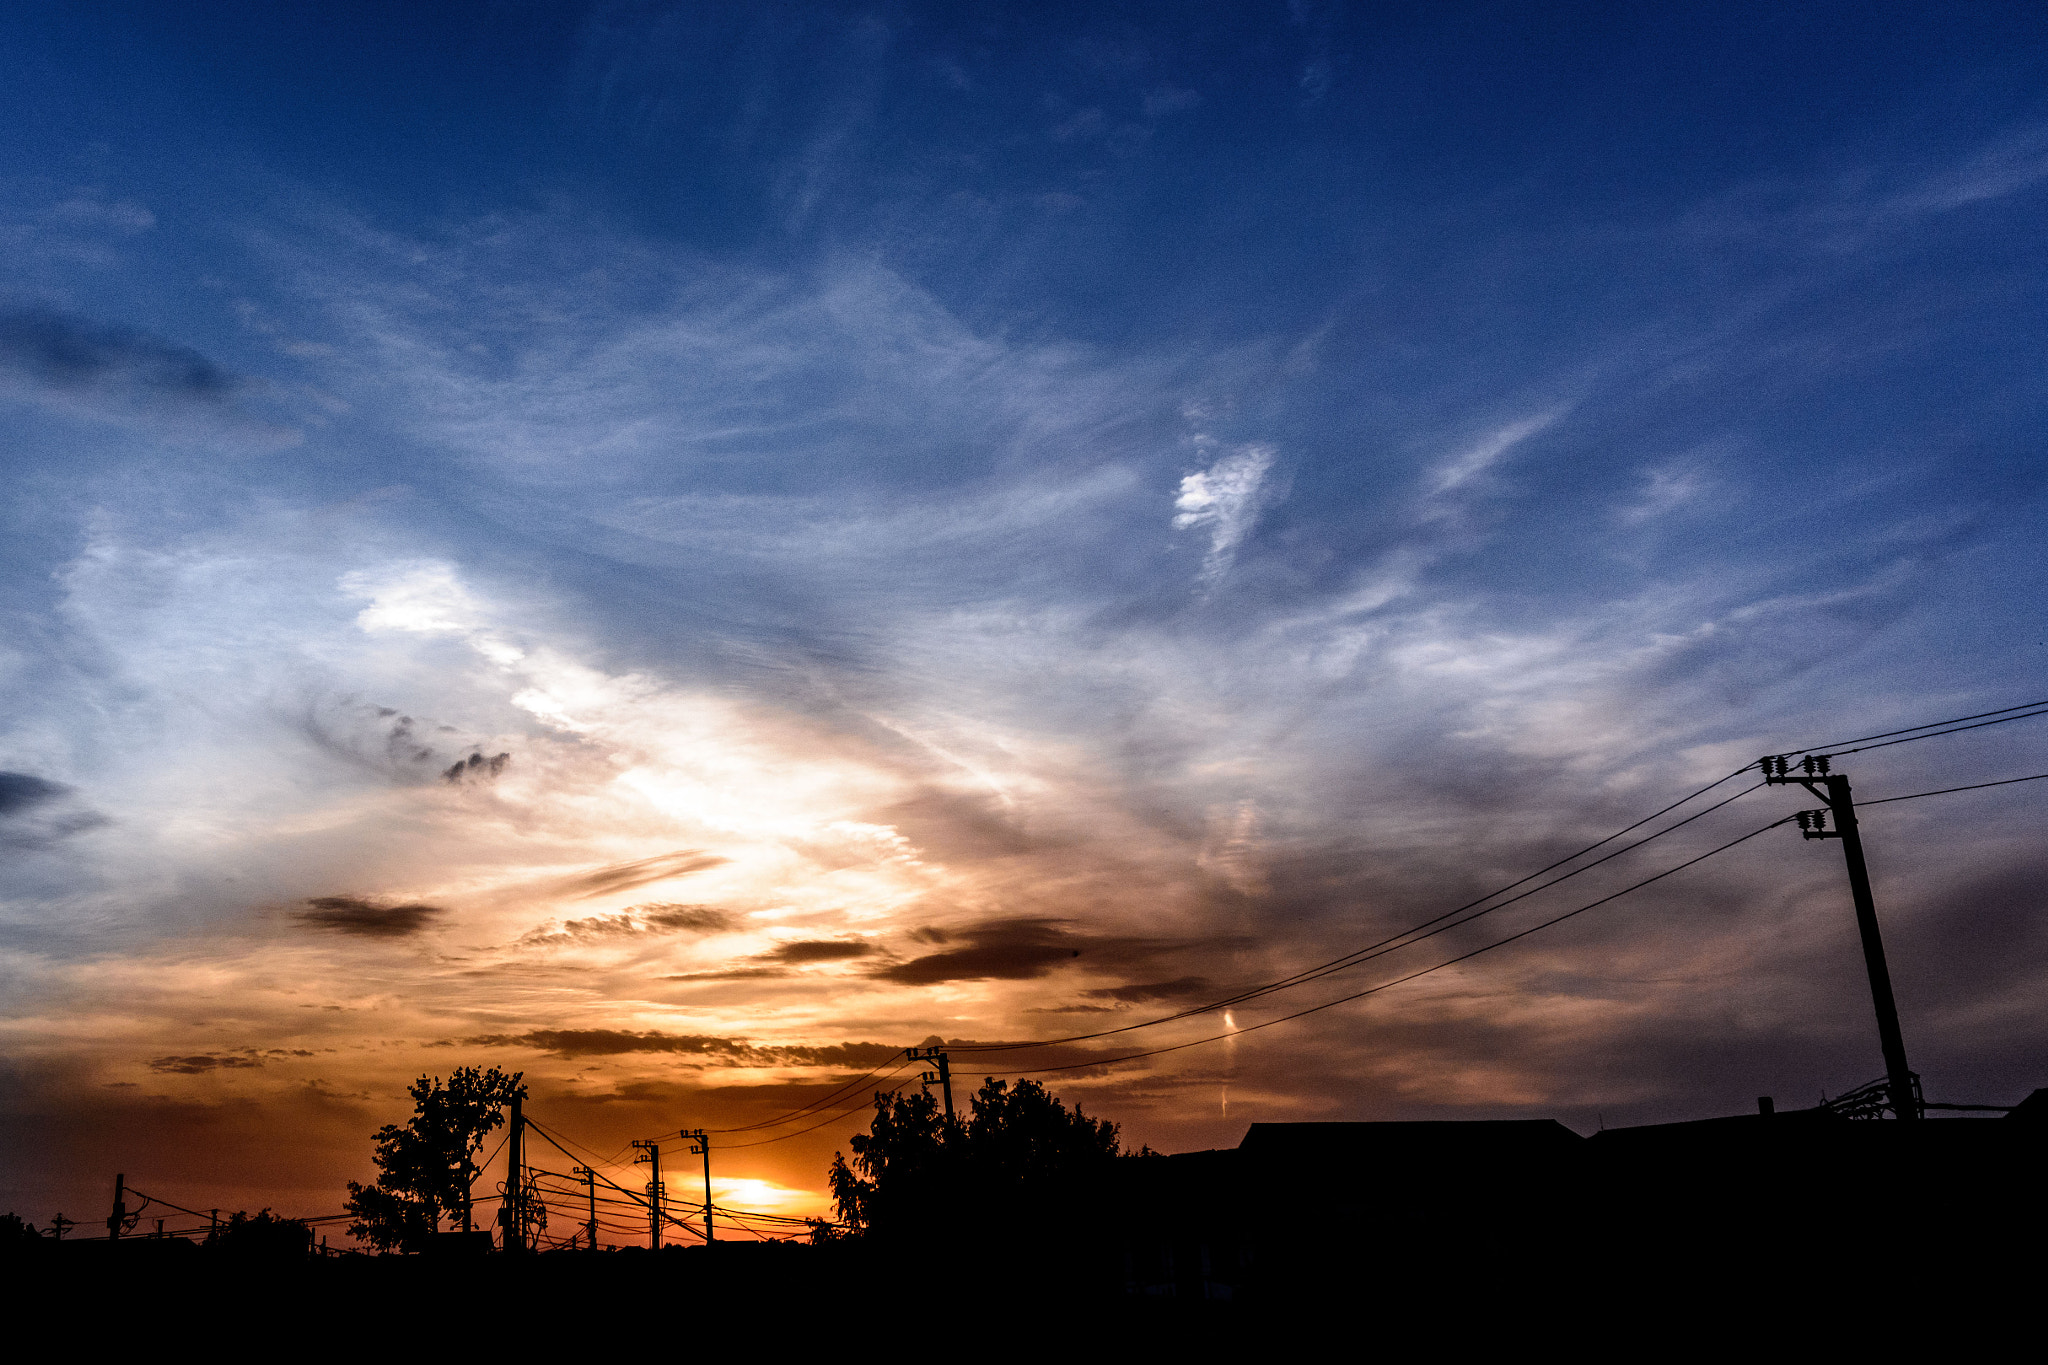 Nikon D5200 + Sigma 17-70mm F2.8-4 DC Macro OS HSM | C sample photo. Sunset in the village photography